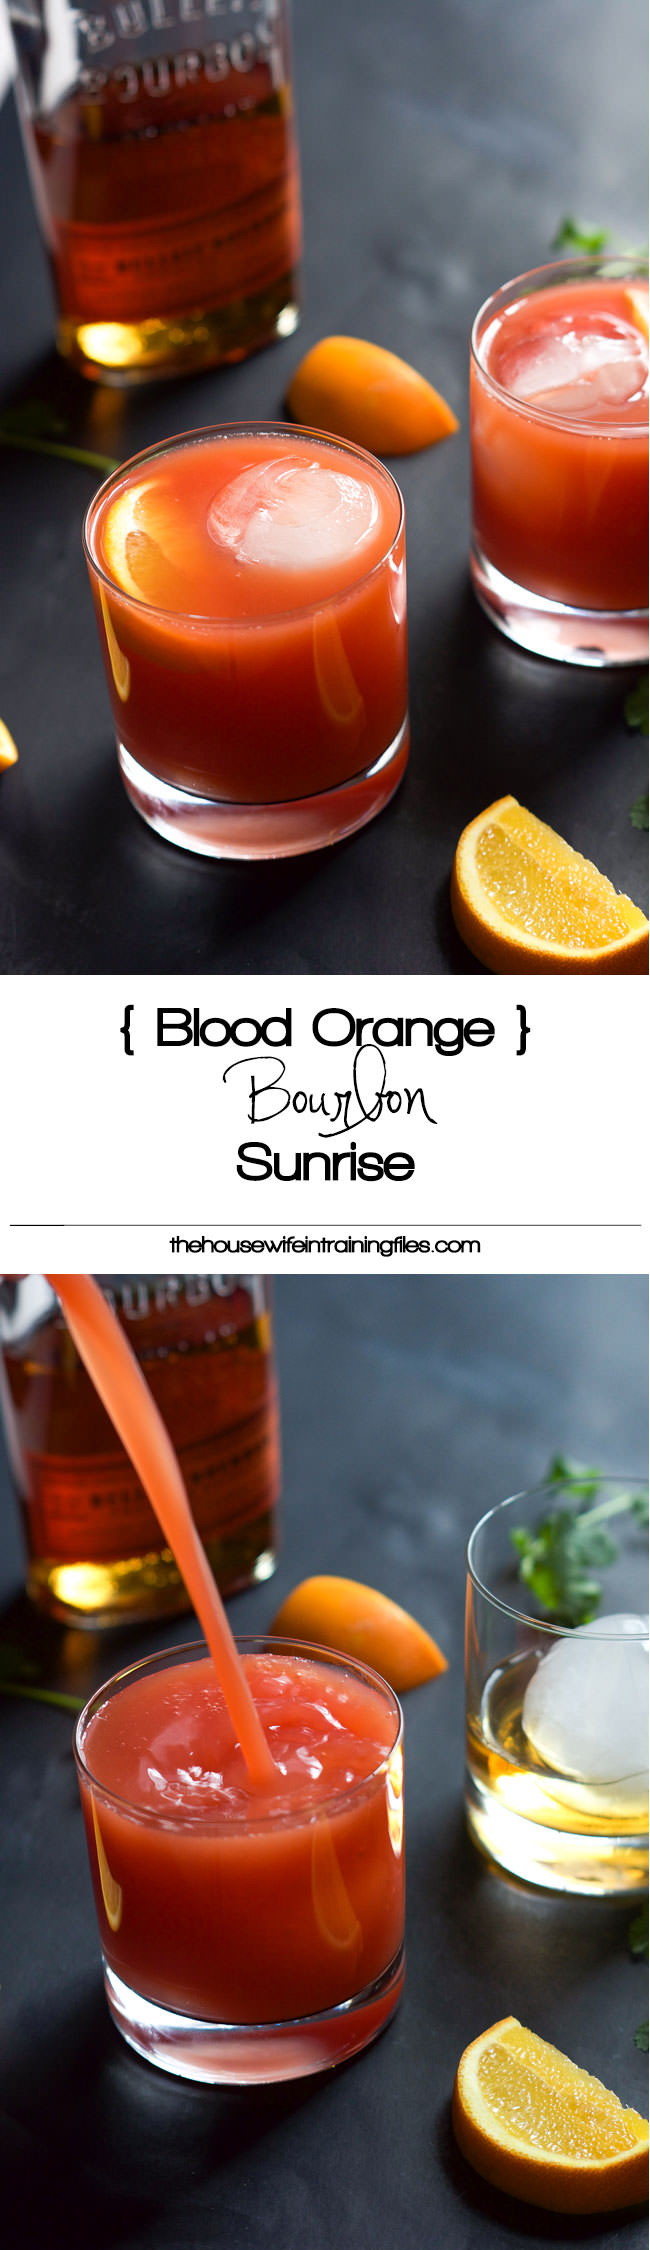 This Blood Orange Bourbon Sunrise is a sweet and sour cocktail that is spiced with smooth bourbon, fresh blood orange juice and a touch of honey! #cocktail #drink #bourbon #whiskey